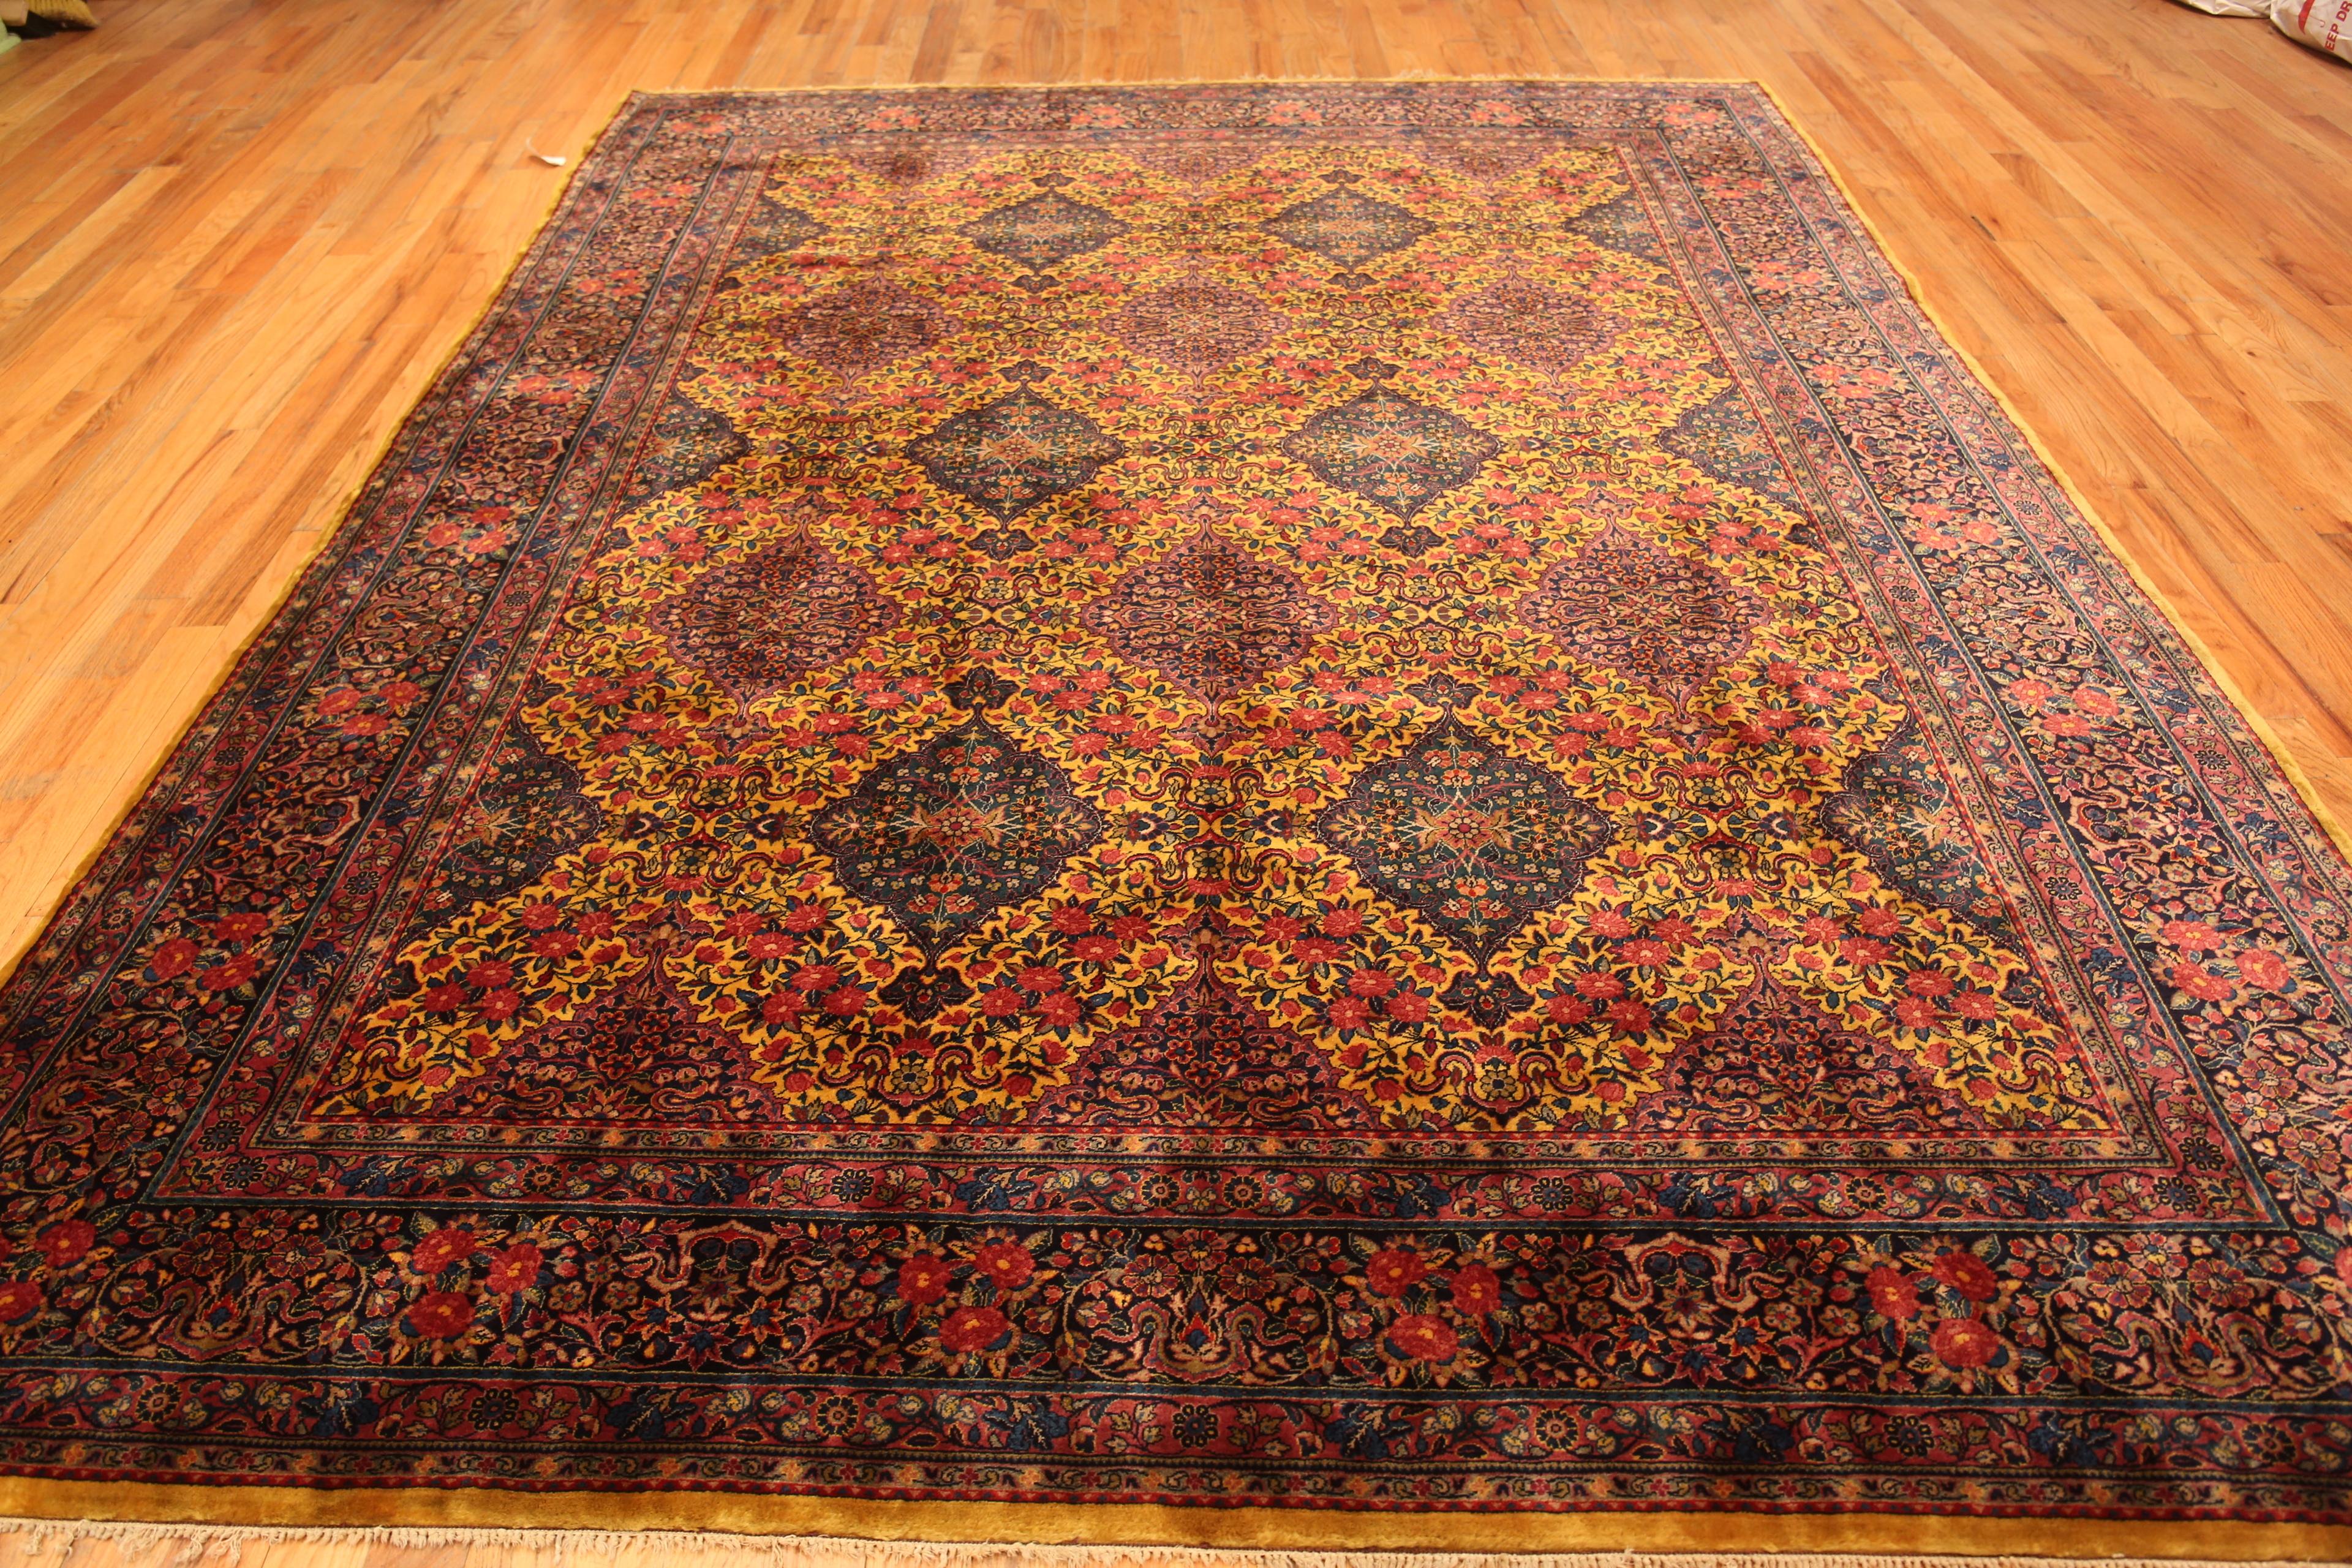 Antique Persian Kashan Area Rug, Country of origin: Persia, Circa date: 1900. Size: 8 ft 10 in x 11 ft 9 in (2.69 m x 3.58 m)

